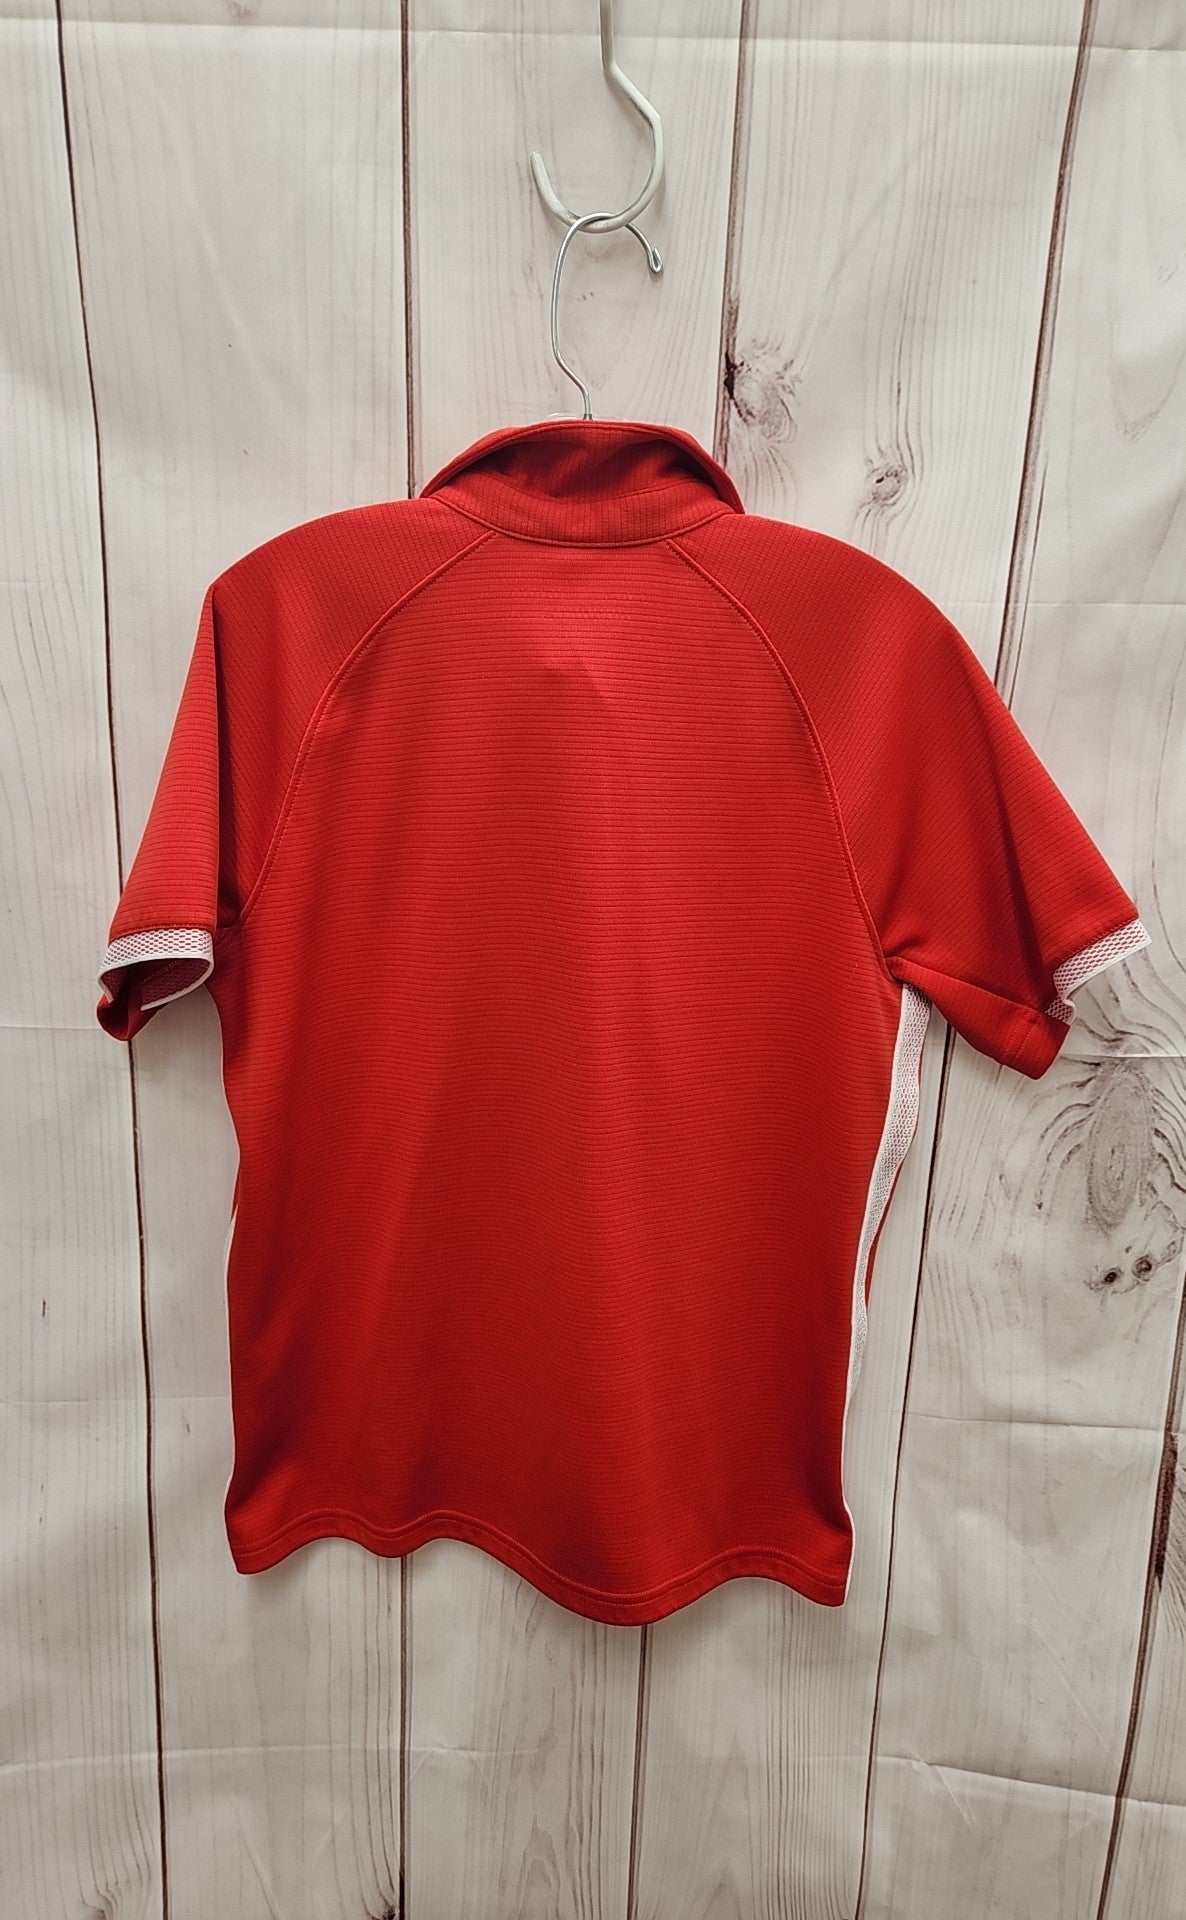 Under Armour Boy's Size 14 Red Shirt